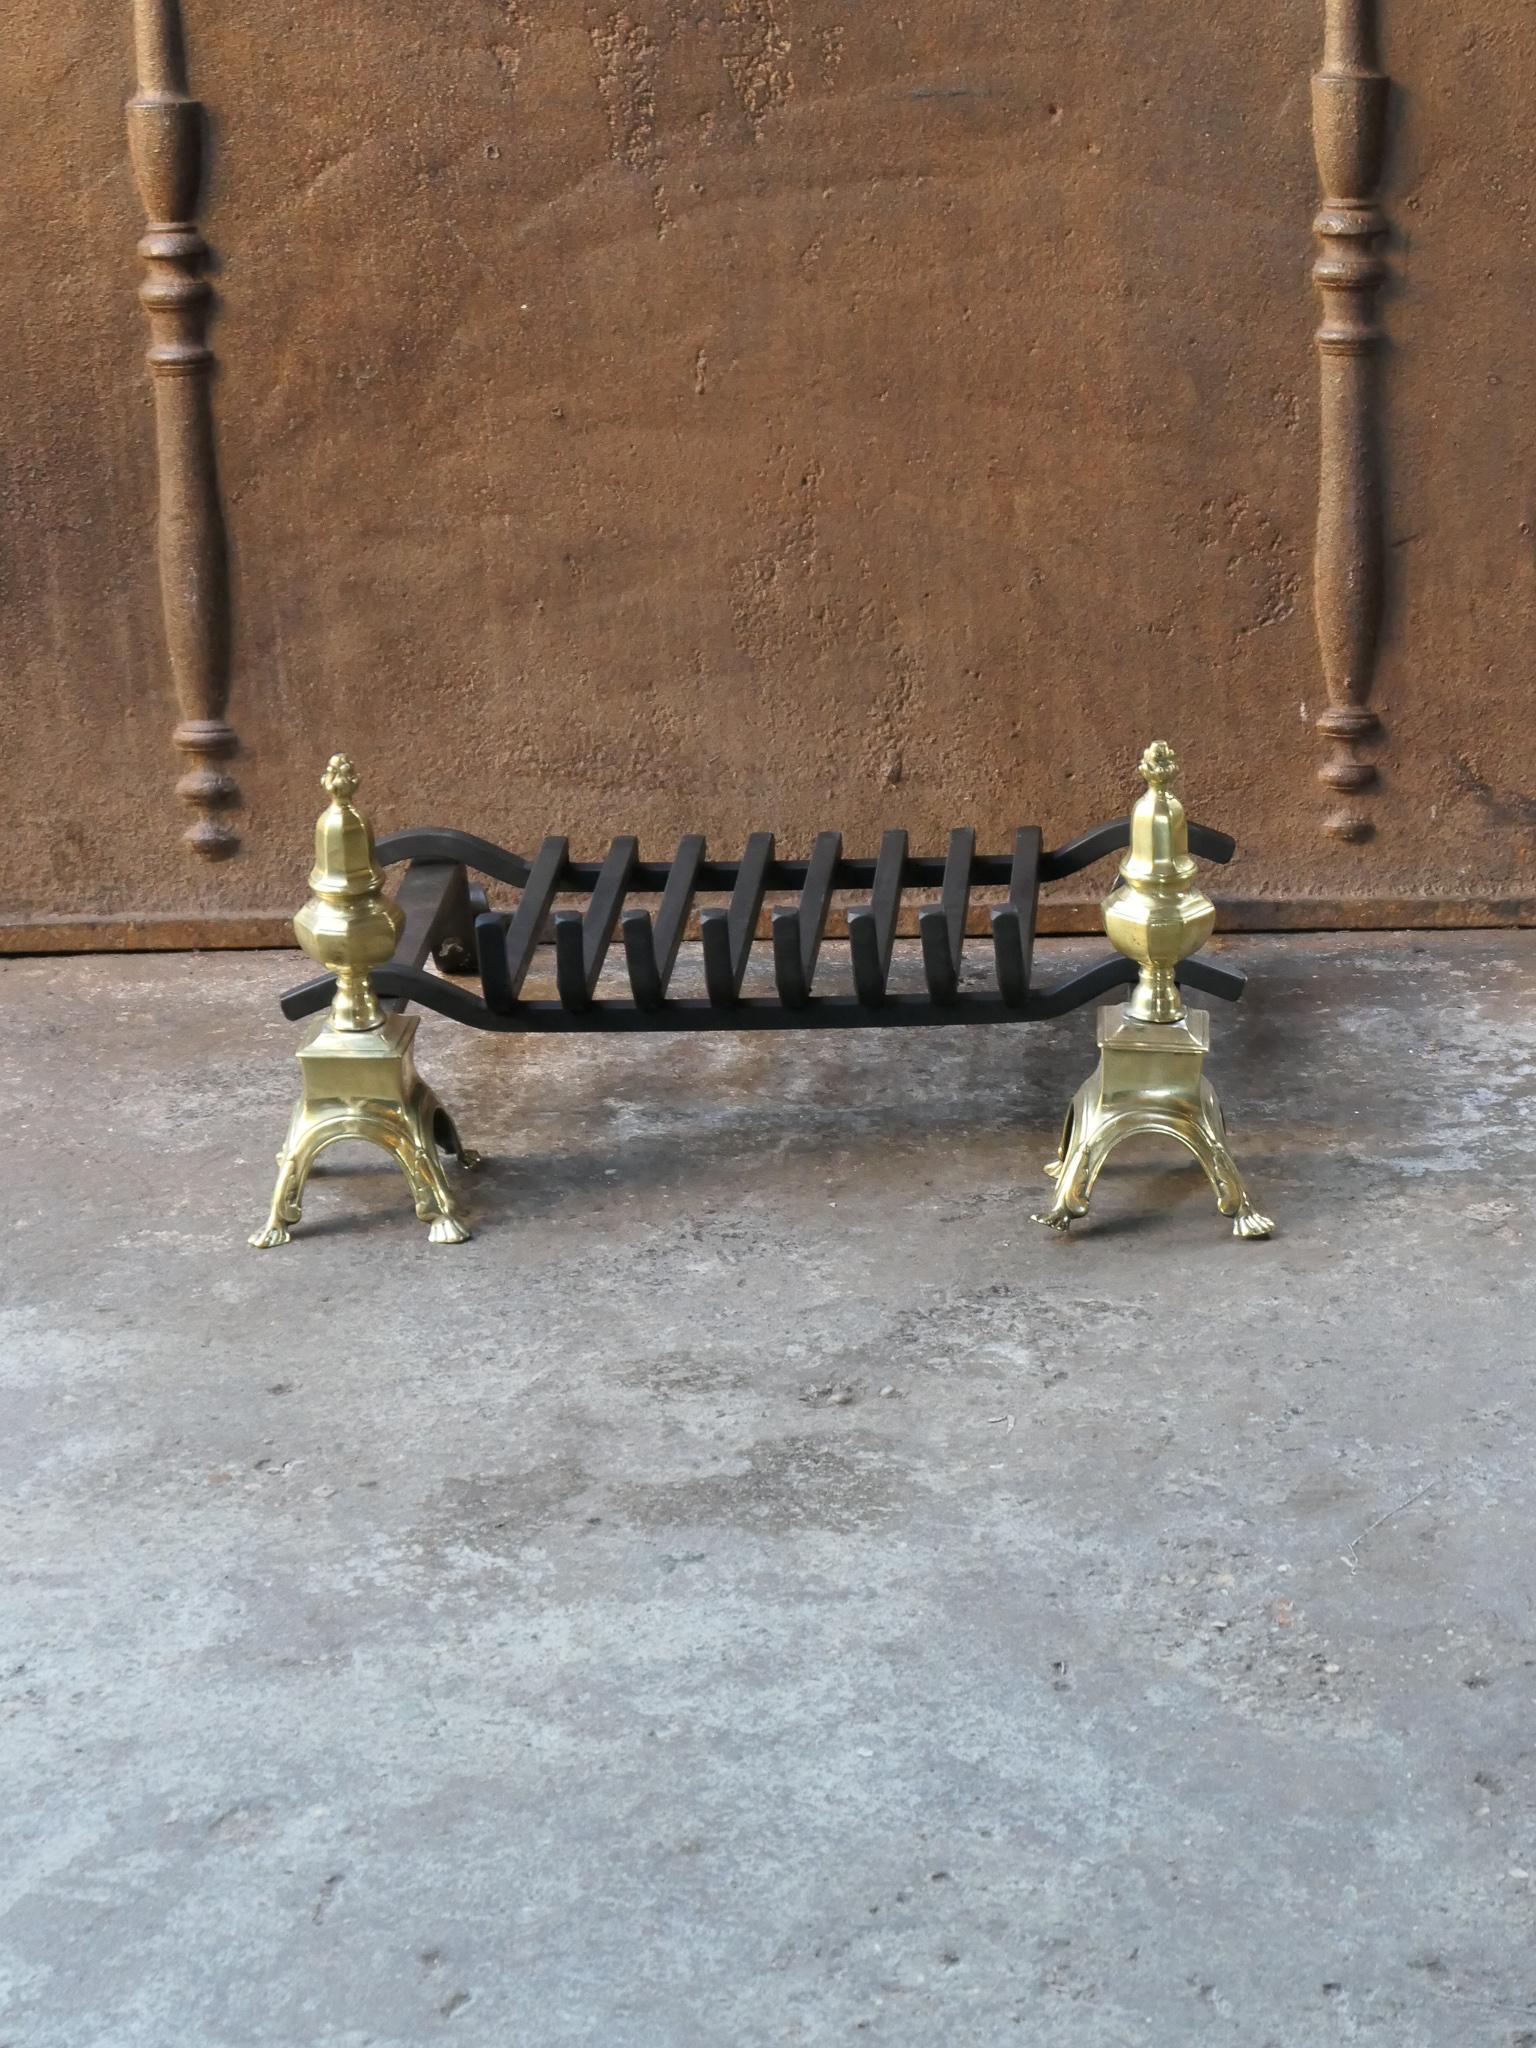 French 17th - 18th century fireplace basket or fire grate from the Louis XIV period. The fireplace grate is made of wrought iron and polished brass. The condition is good.



















 